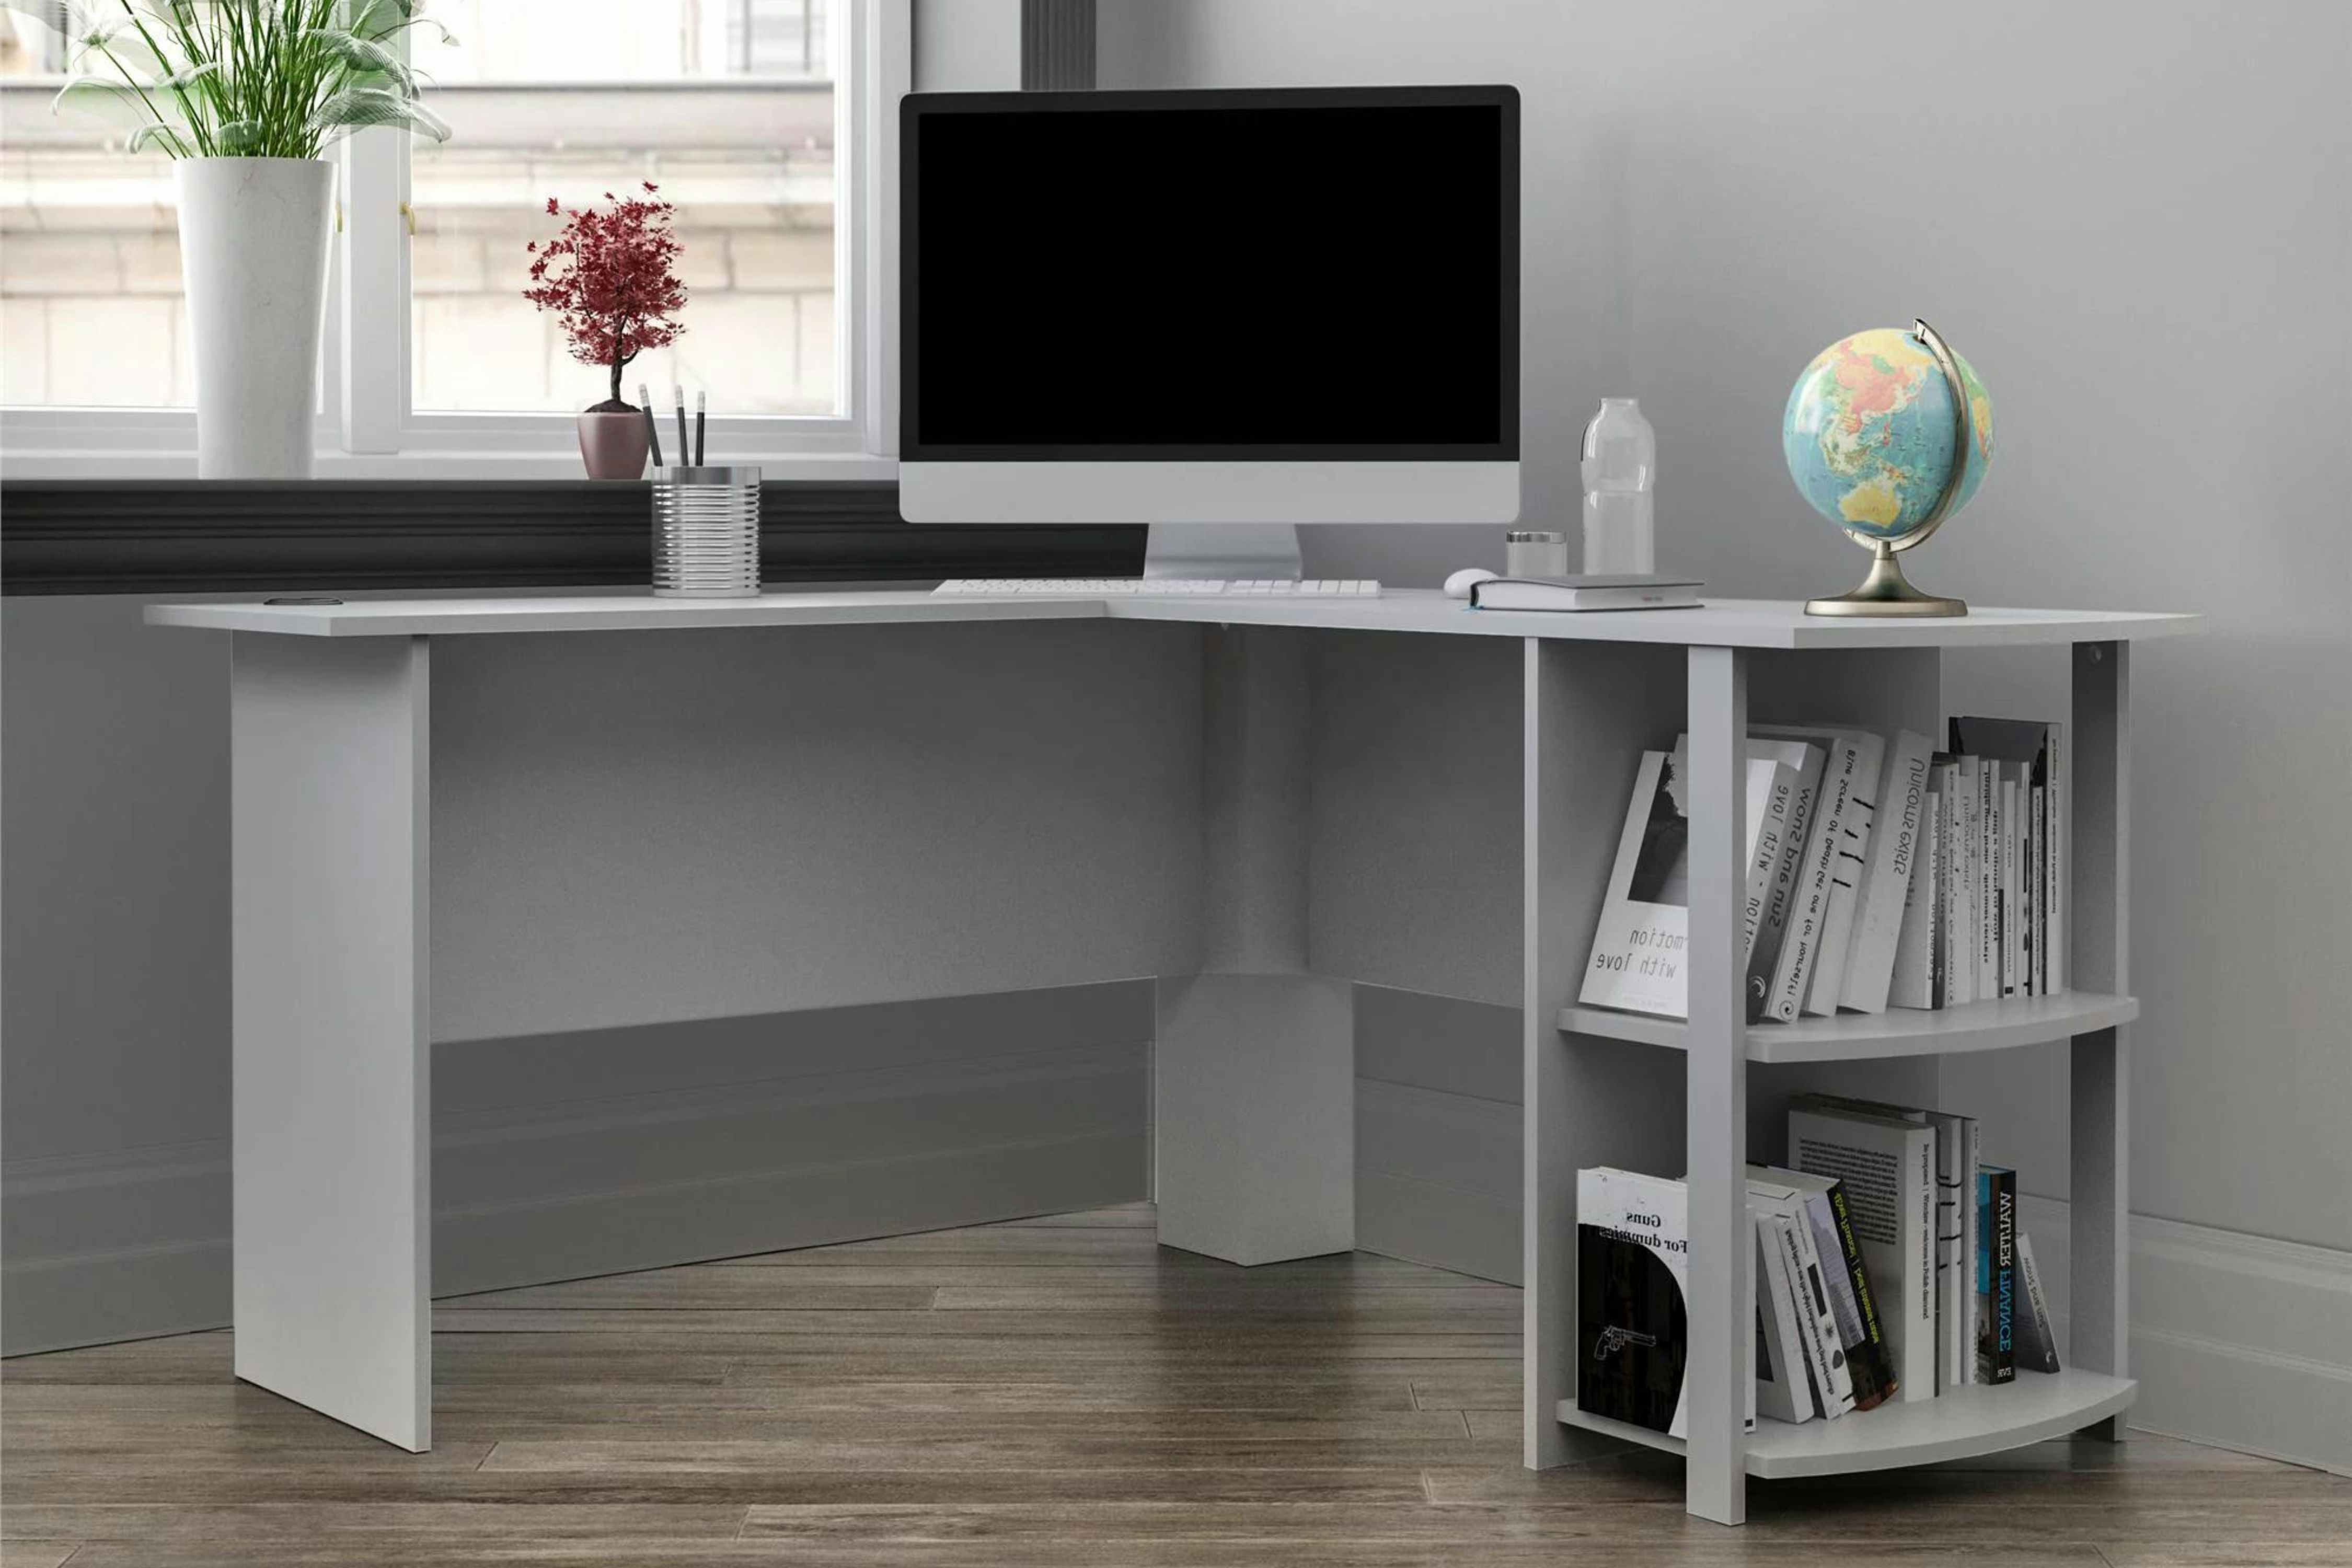 This L-Shaped Desk Is on Clearance for Only $60 at Walmart